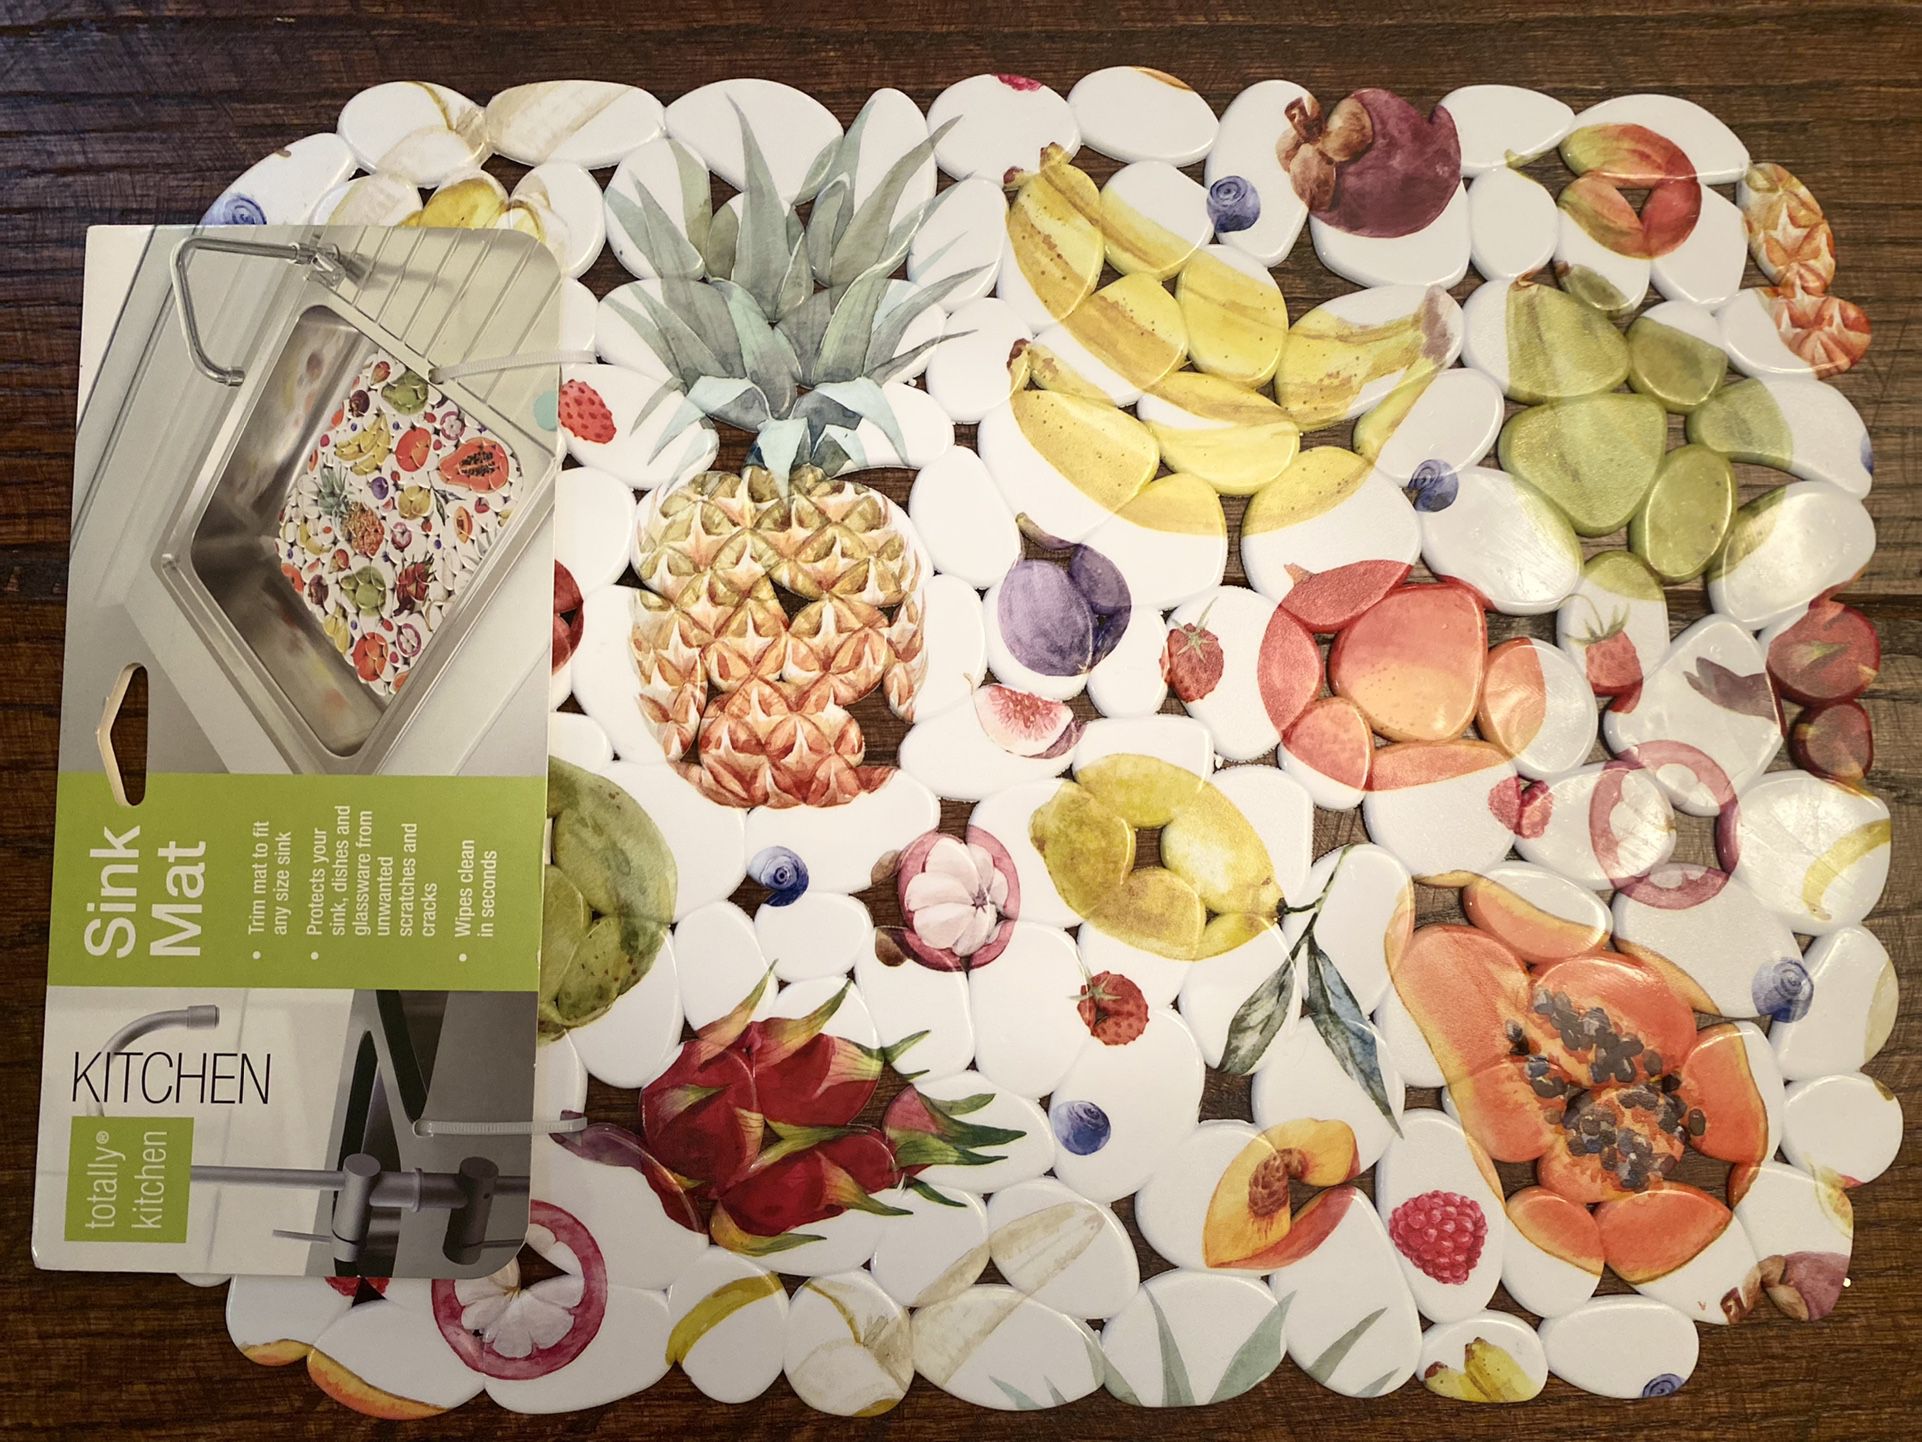 Sink Mat With A Tropical Fruit Theme By Totally Kitchen Protective Pebble Sink Mat